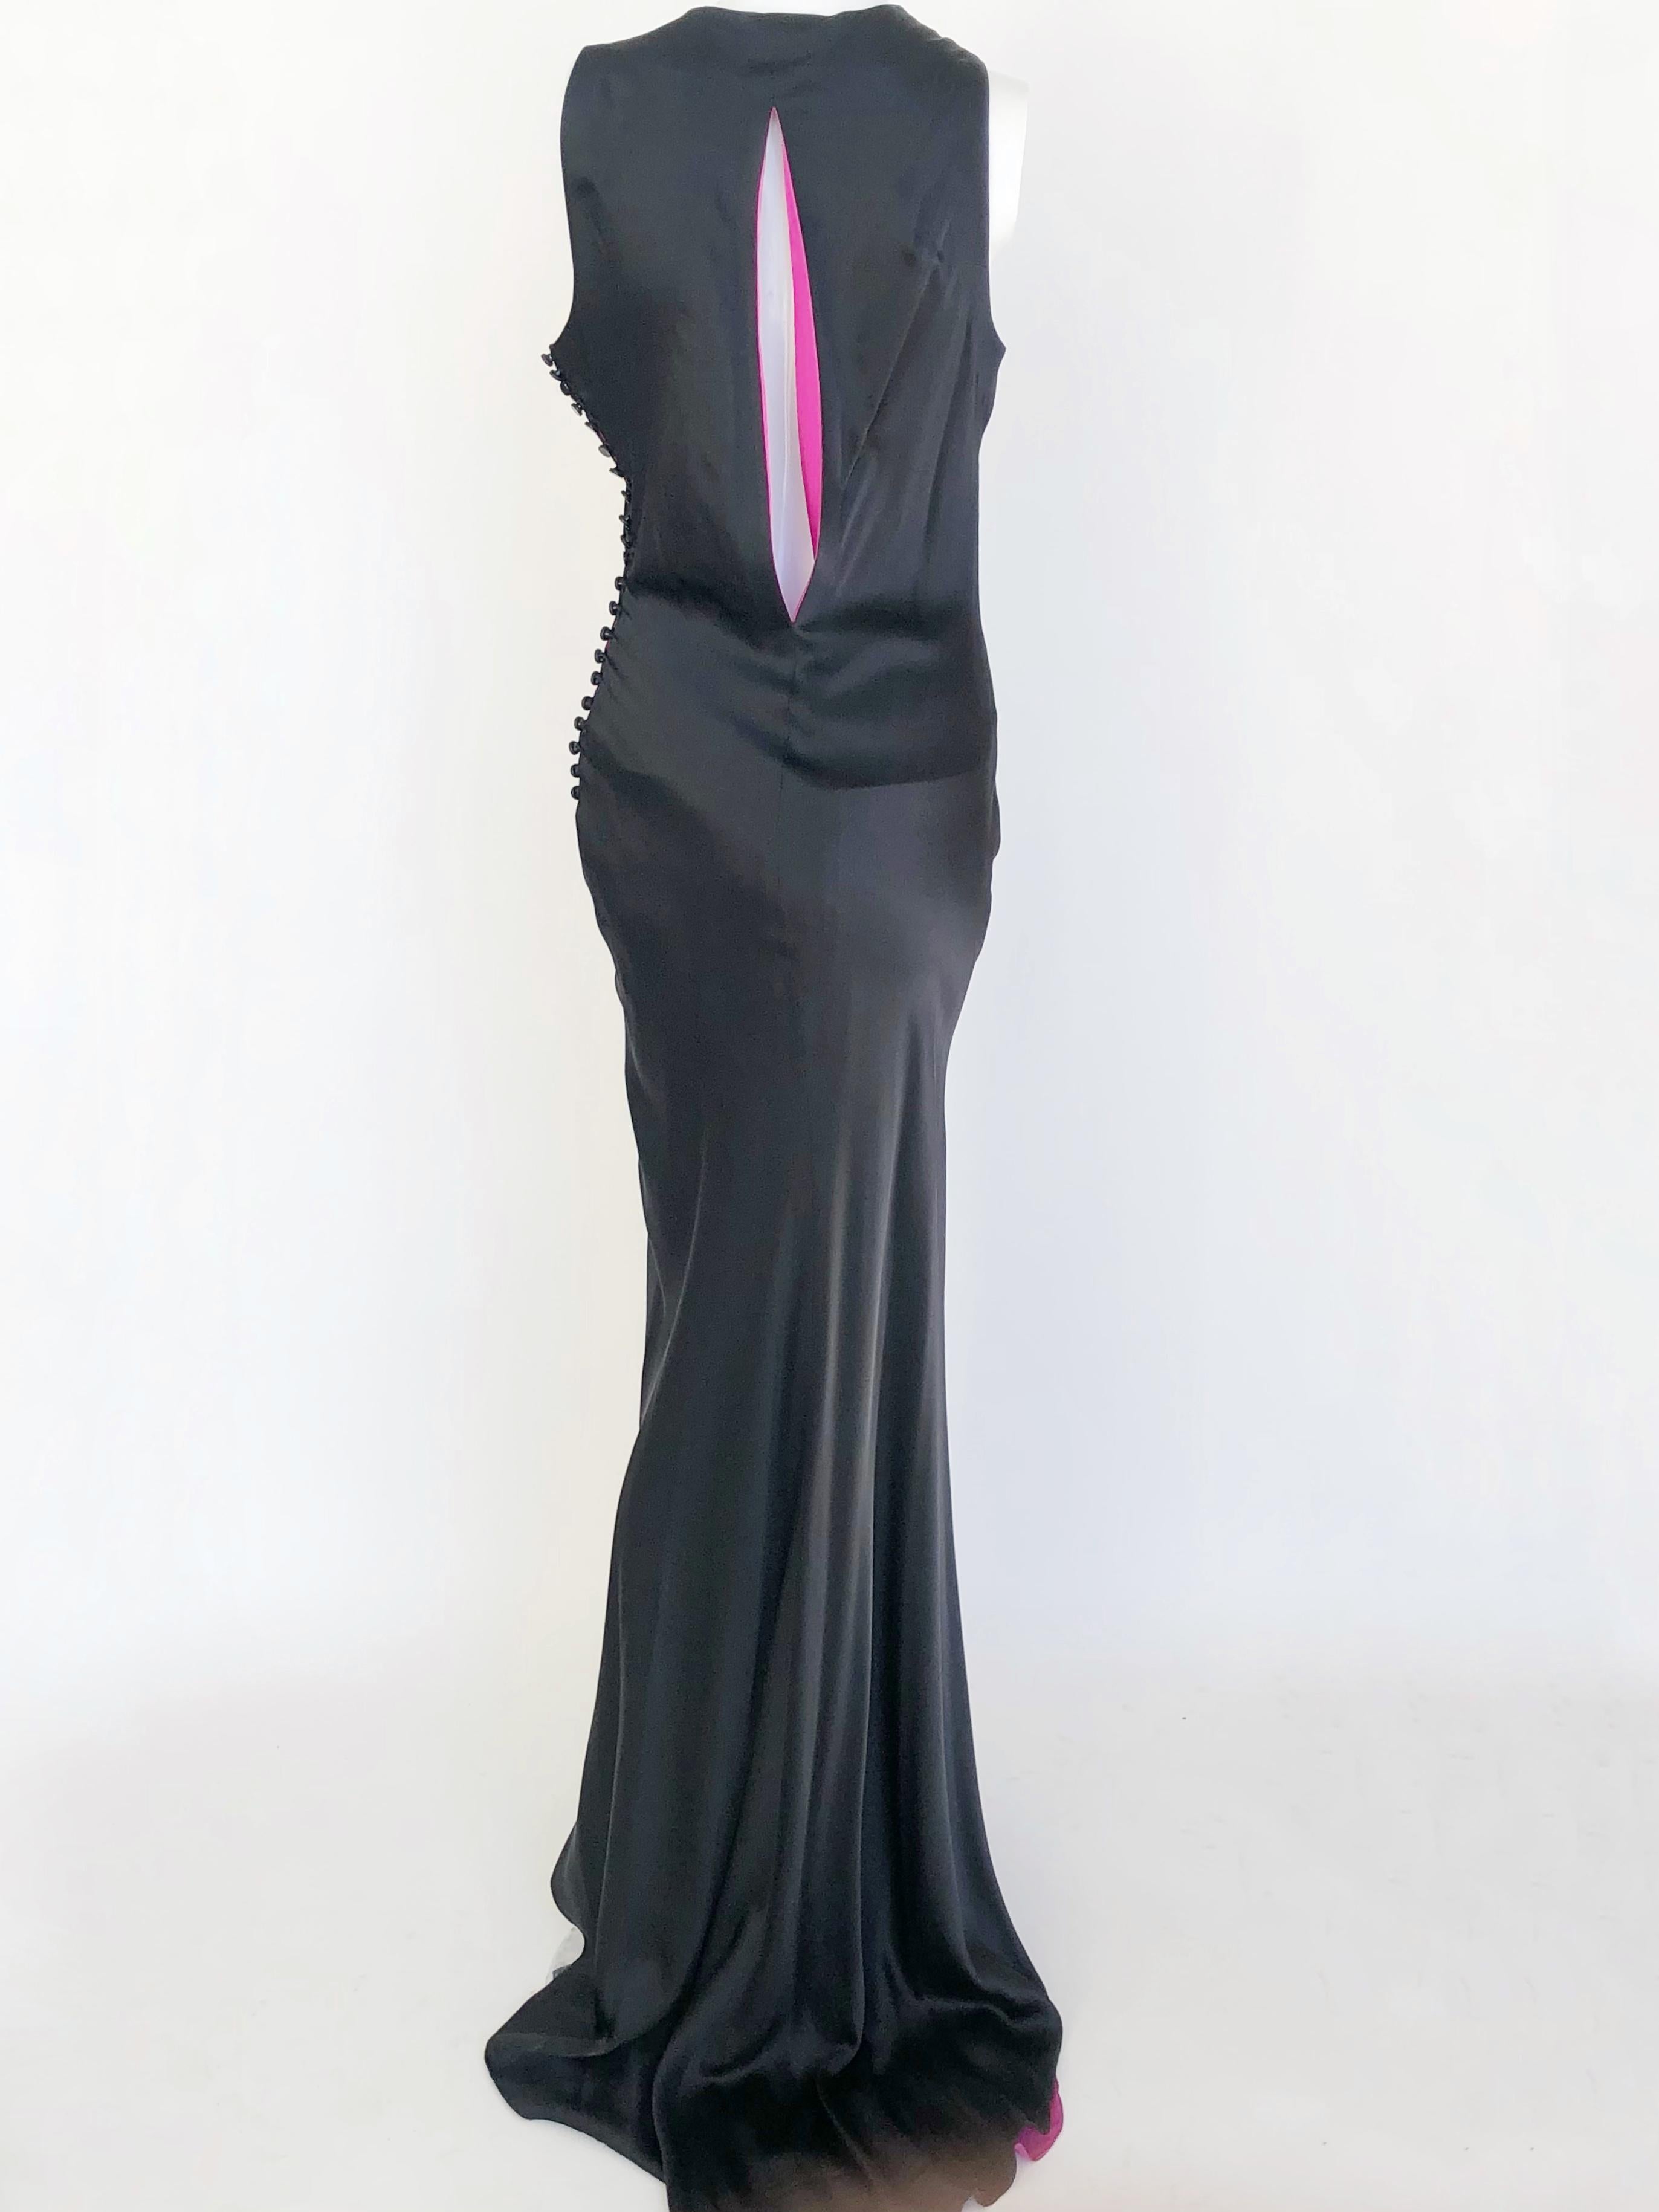 Black Lela Rose satin gown with fuchsia lining.  For Sale